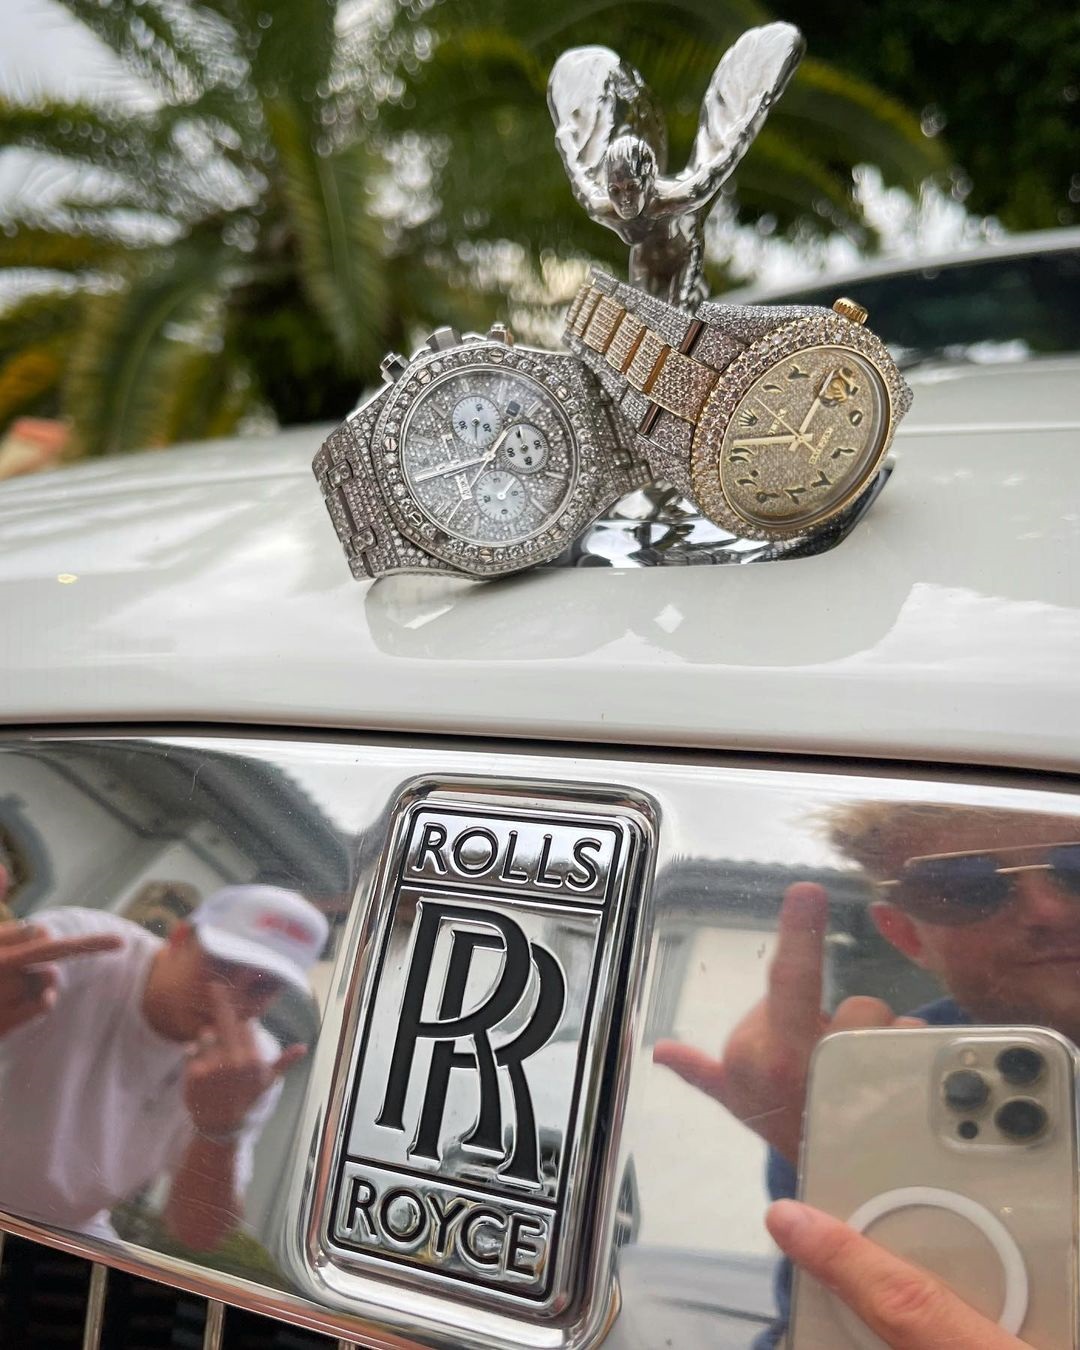 Paul first became acquainted with the Rolls-Royce brand in 2018